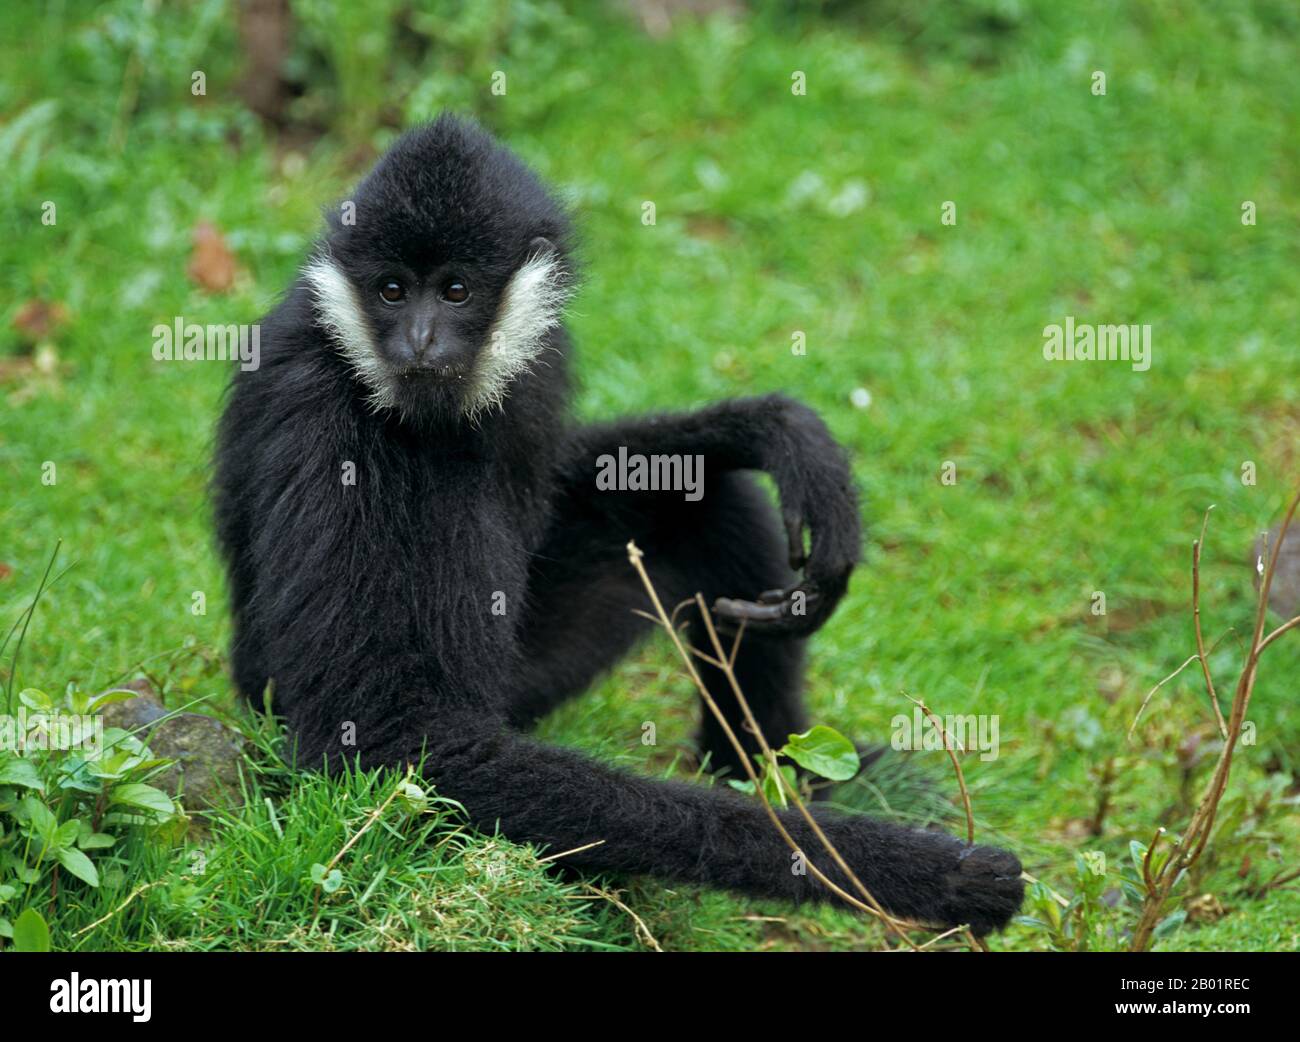 crested gibbon, black-crested Gibbon (Hylobates concolor), male sitting in a meadow Stock Photo